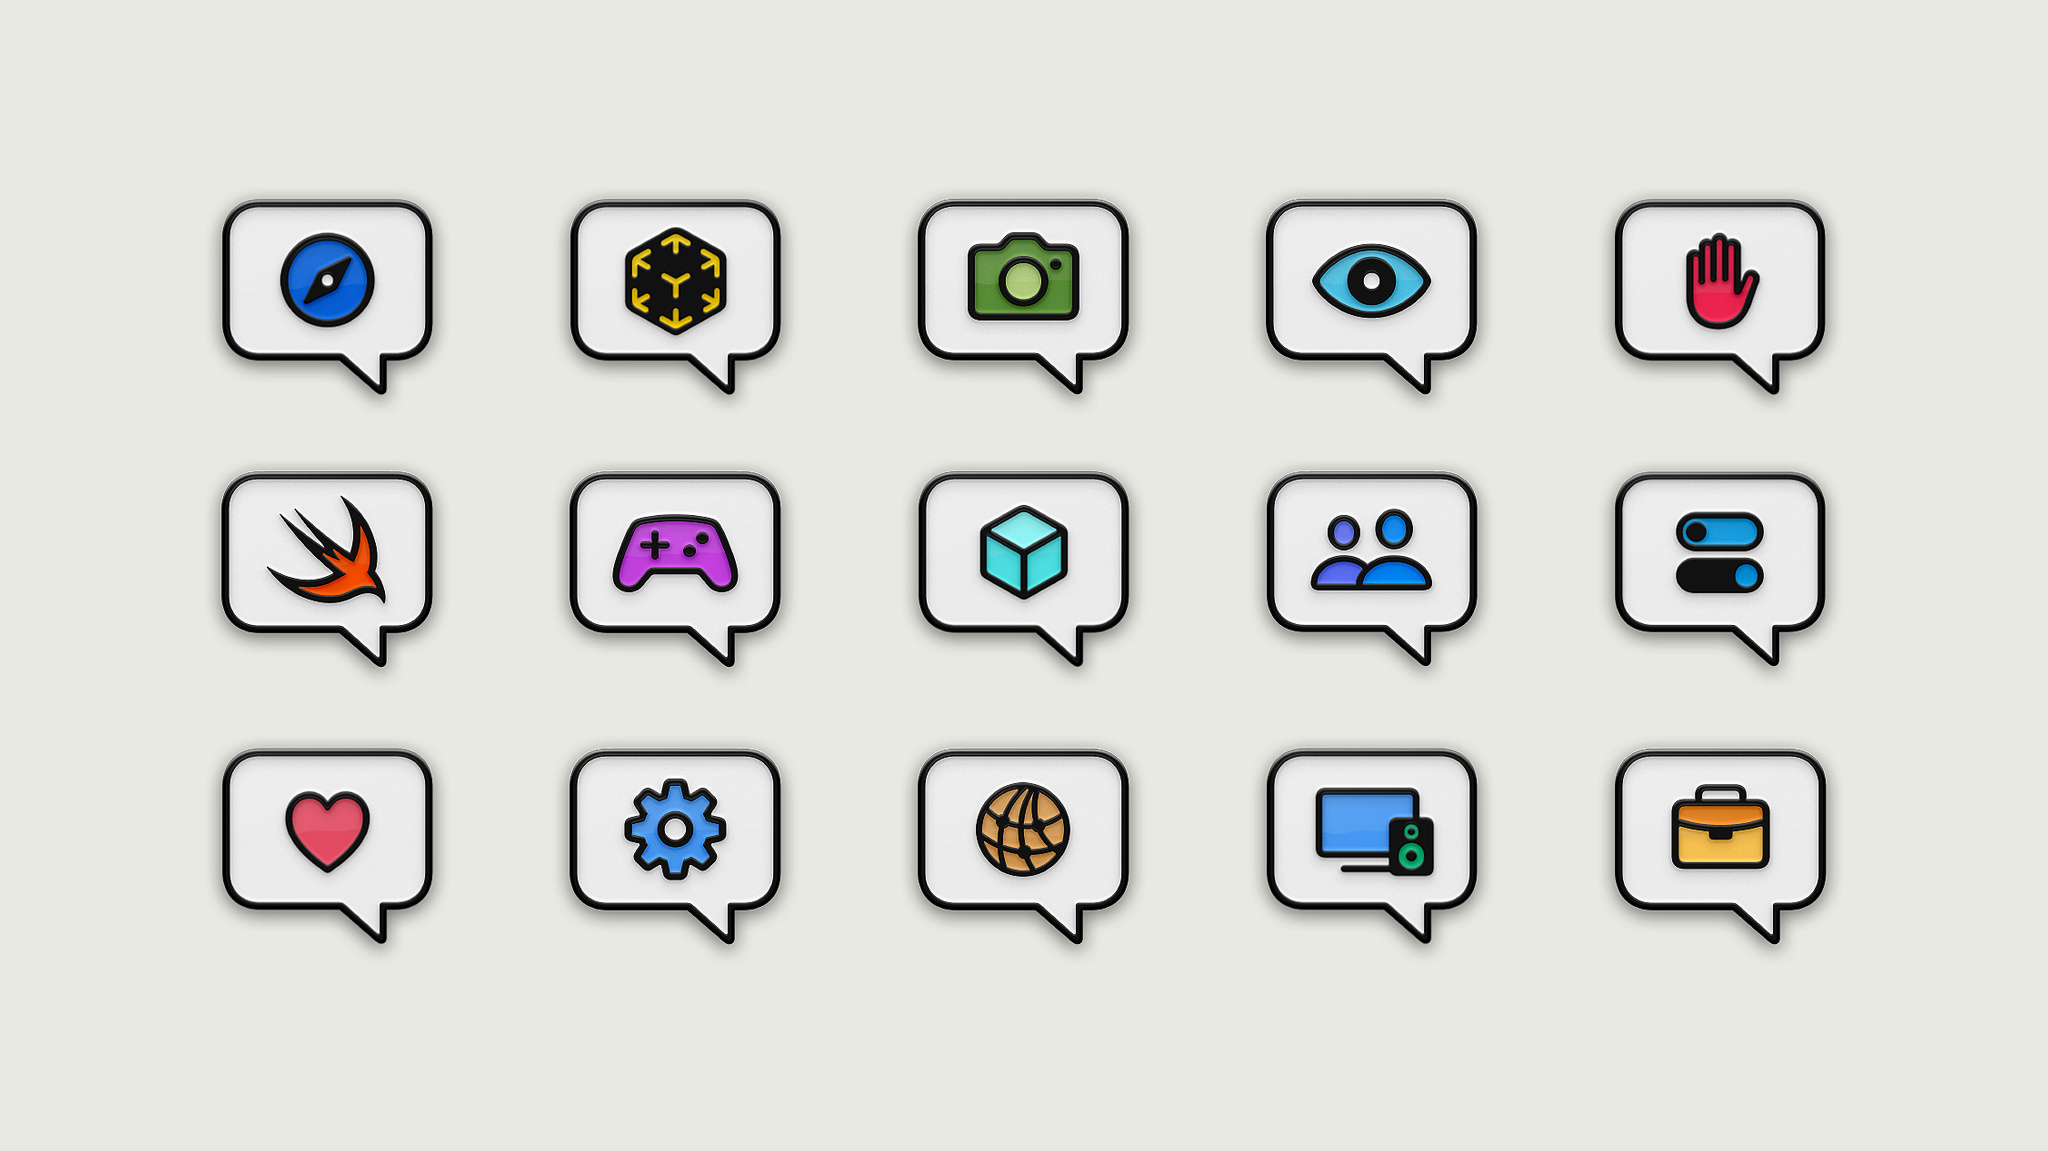 Three rows of colorful icons representing technology topics placed in speech bubbles